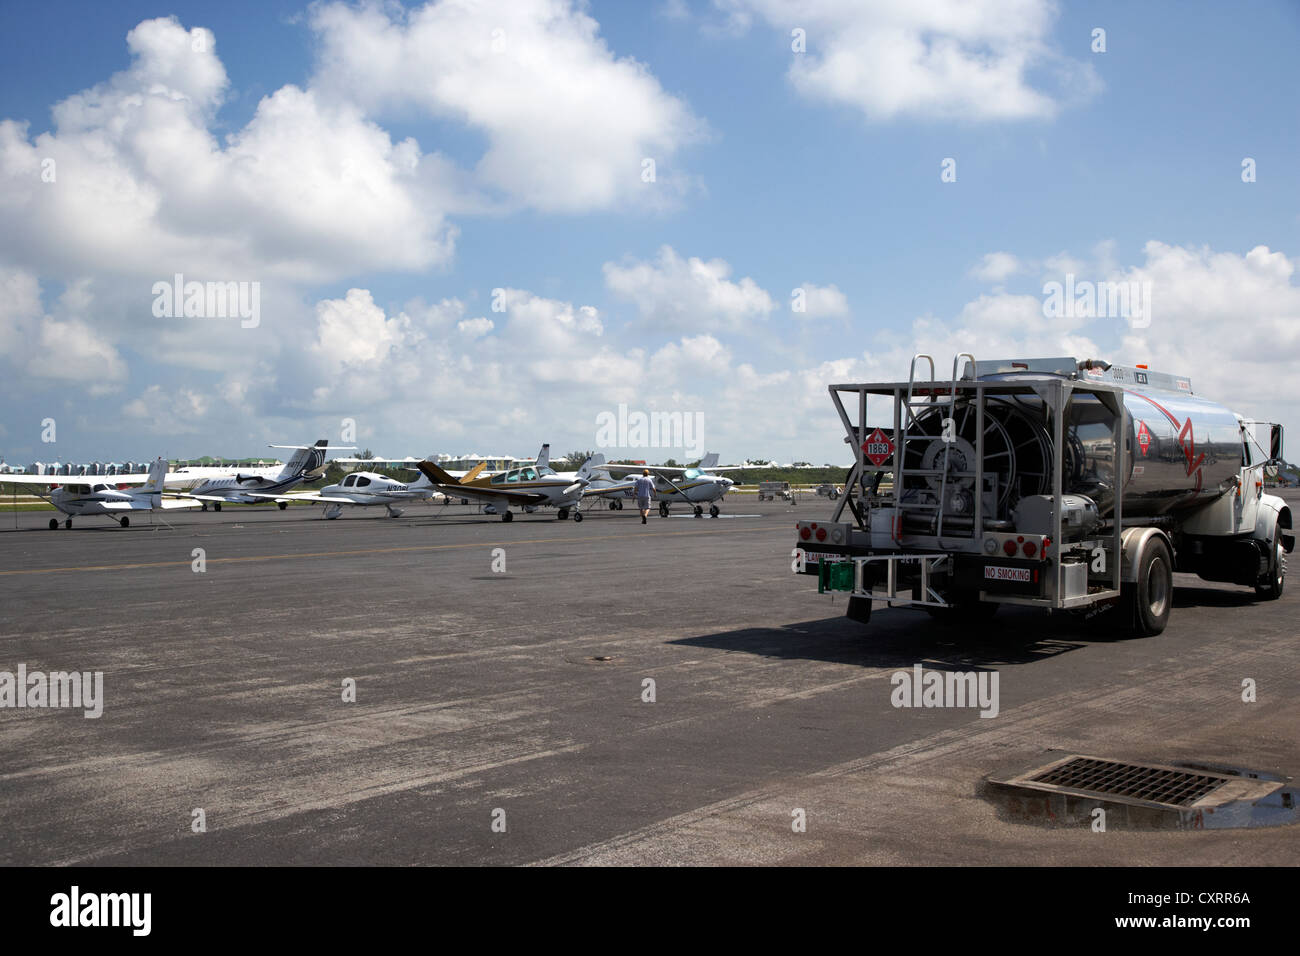 avfuel aviation fuel supply truck and range of private aircraft at small key west international airport florida keys usa Stock Photo